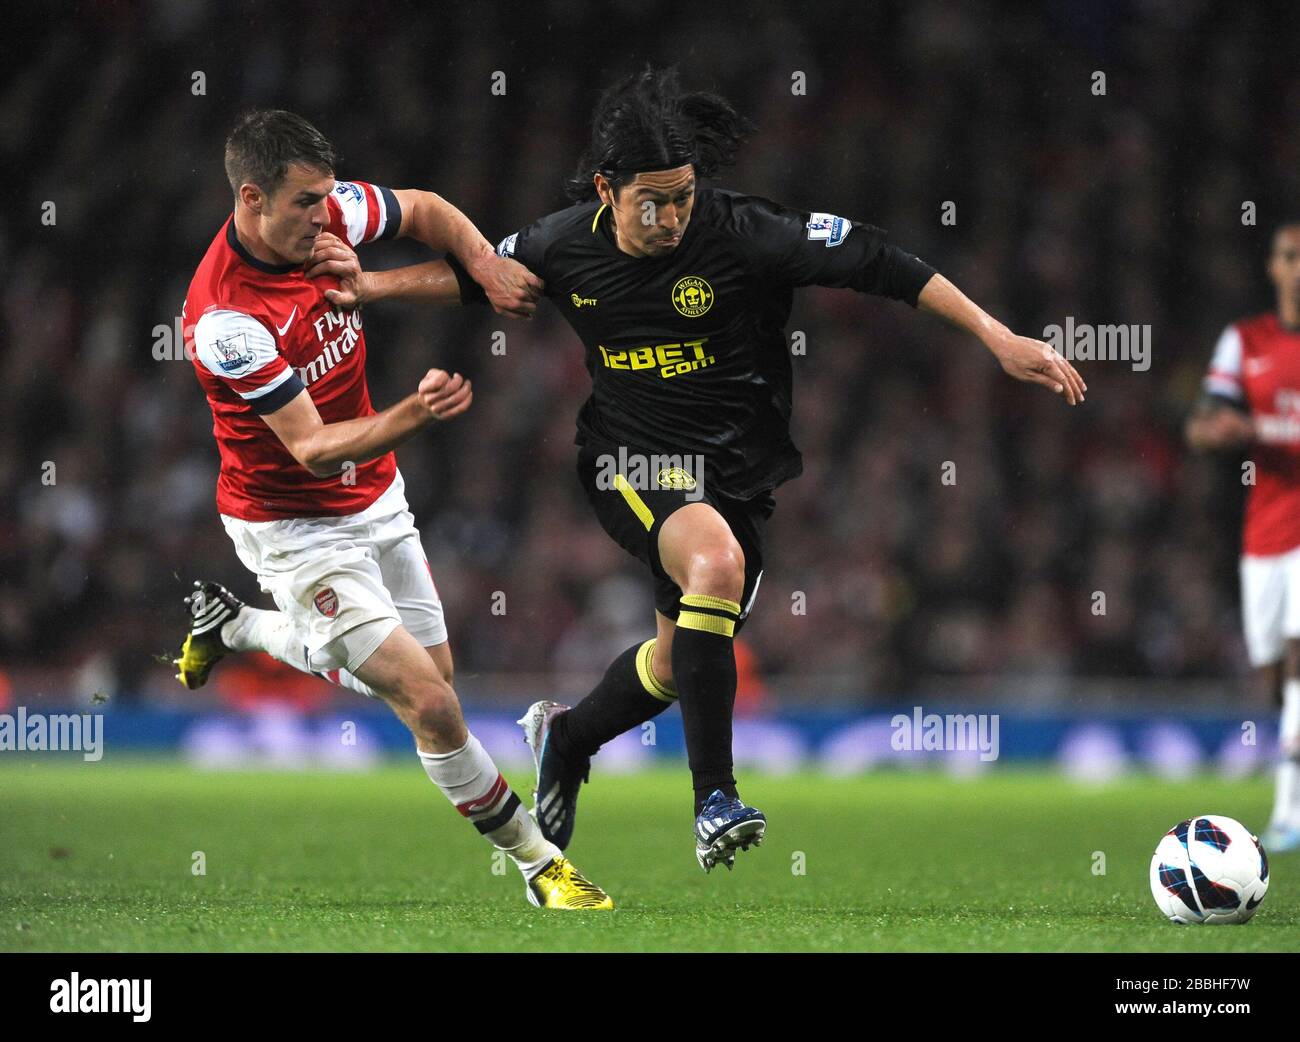 Arsenal's Aaron Ramsey (left) and Wigan Athletic's Roger Espinoza (right) battle for the ball. Stock Photo